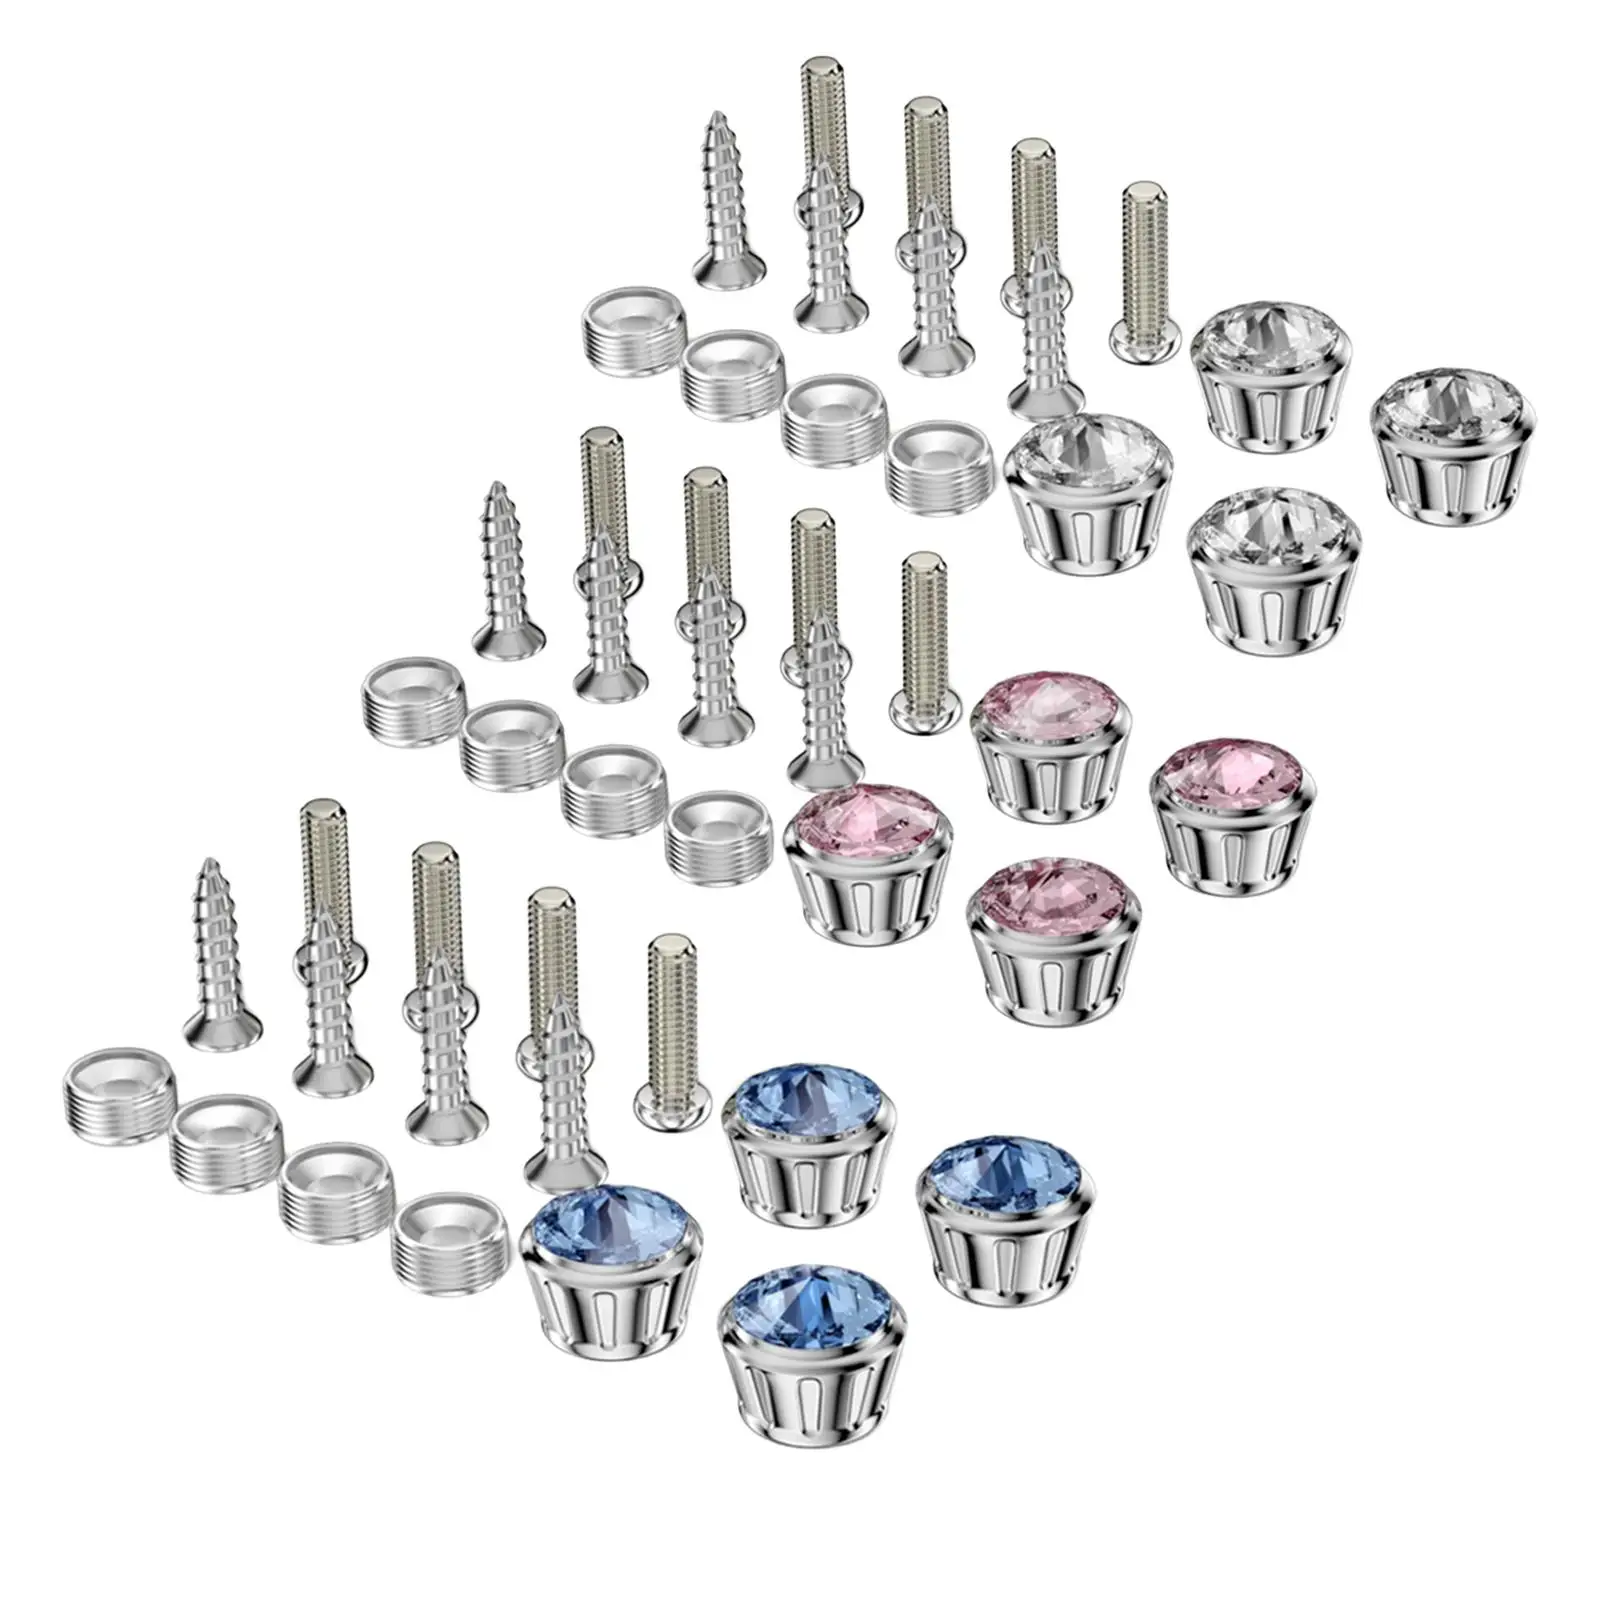 16Pcs Car Anti Theft License Plate Screws Kit CNC Aluminum Alloy Auto Parts Rust Proof License Plate Bolts Fit for Tag Holder